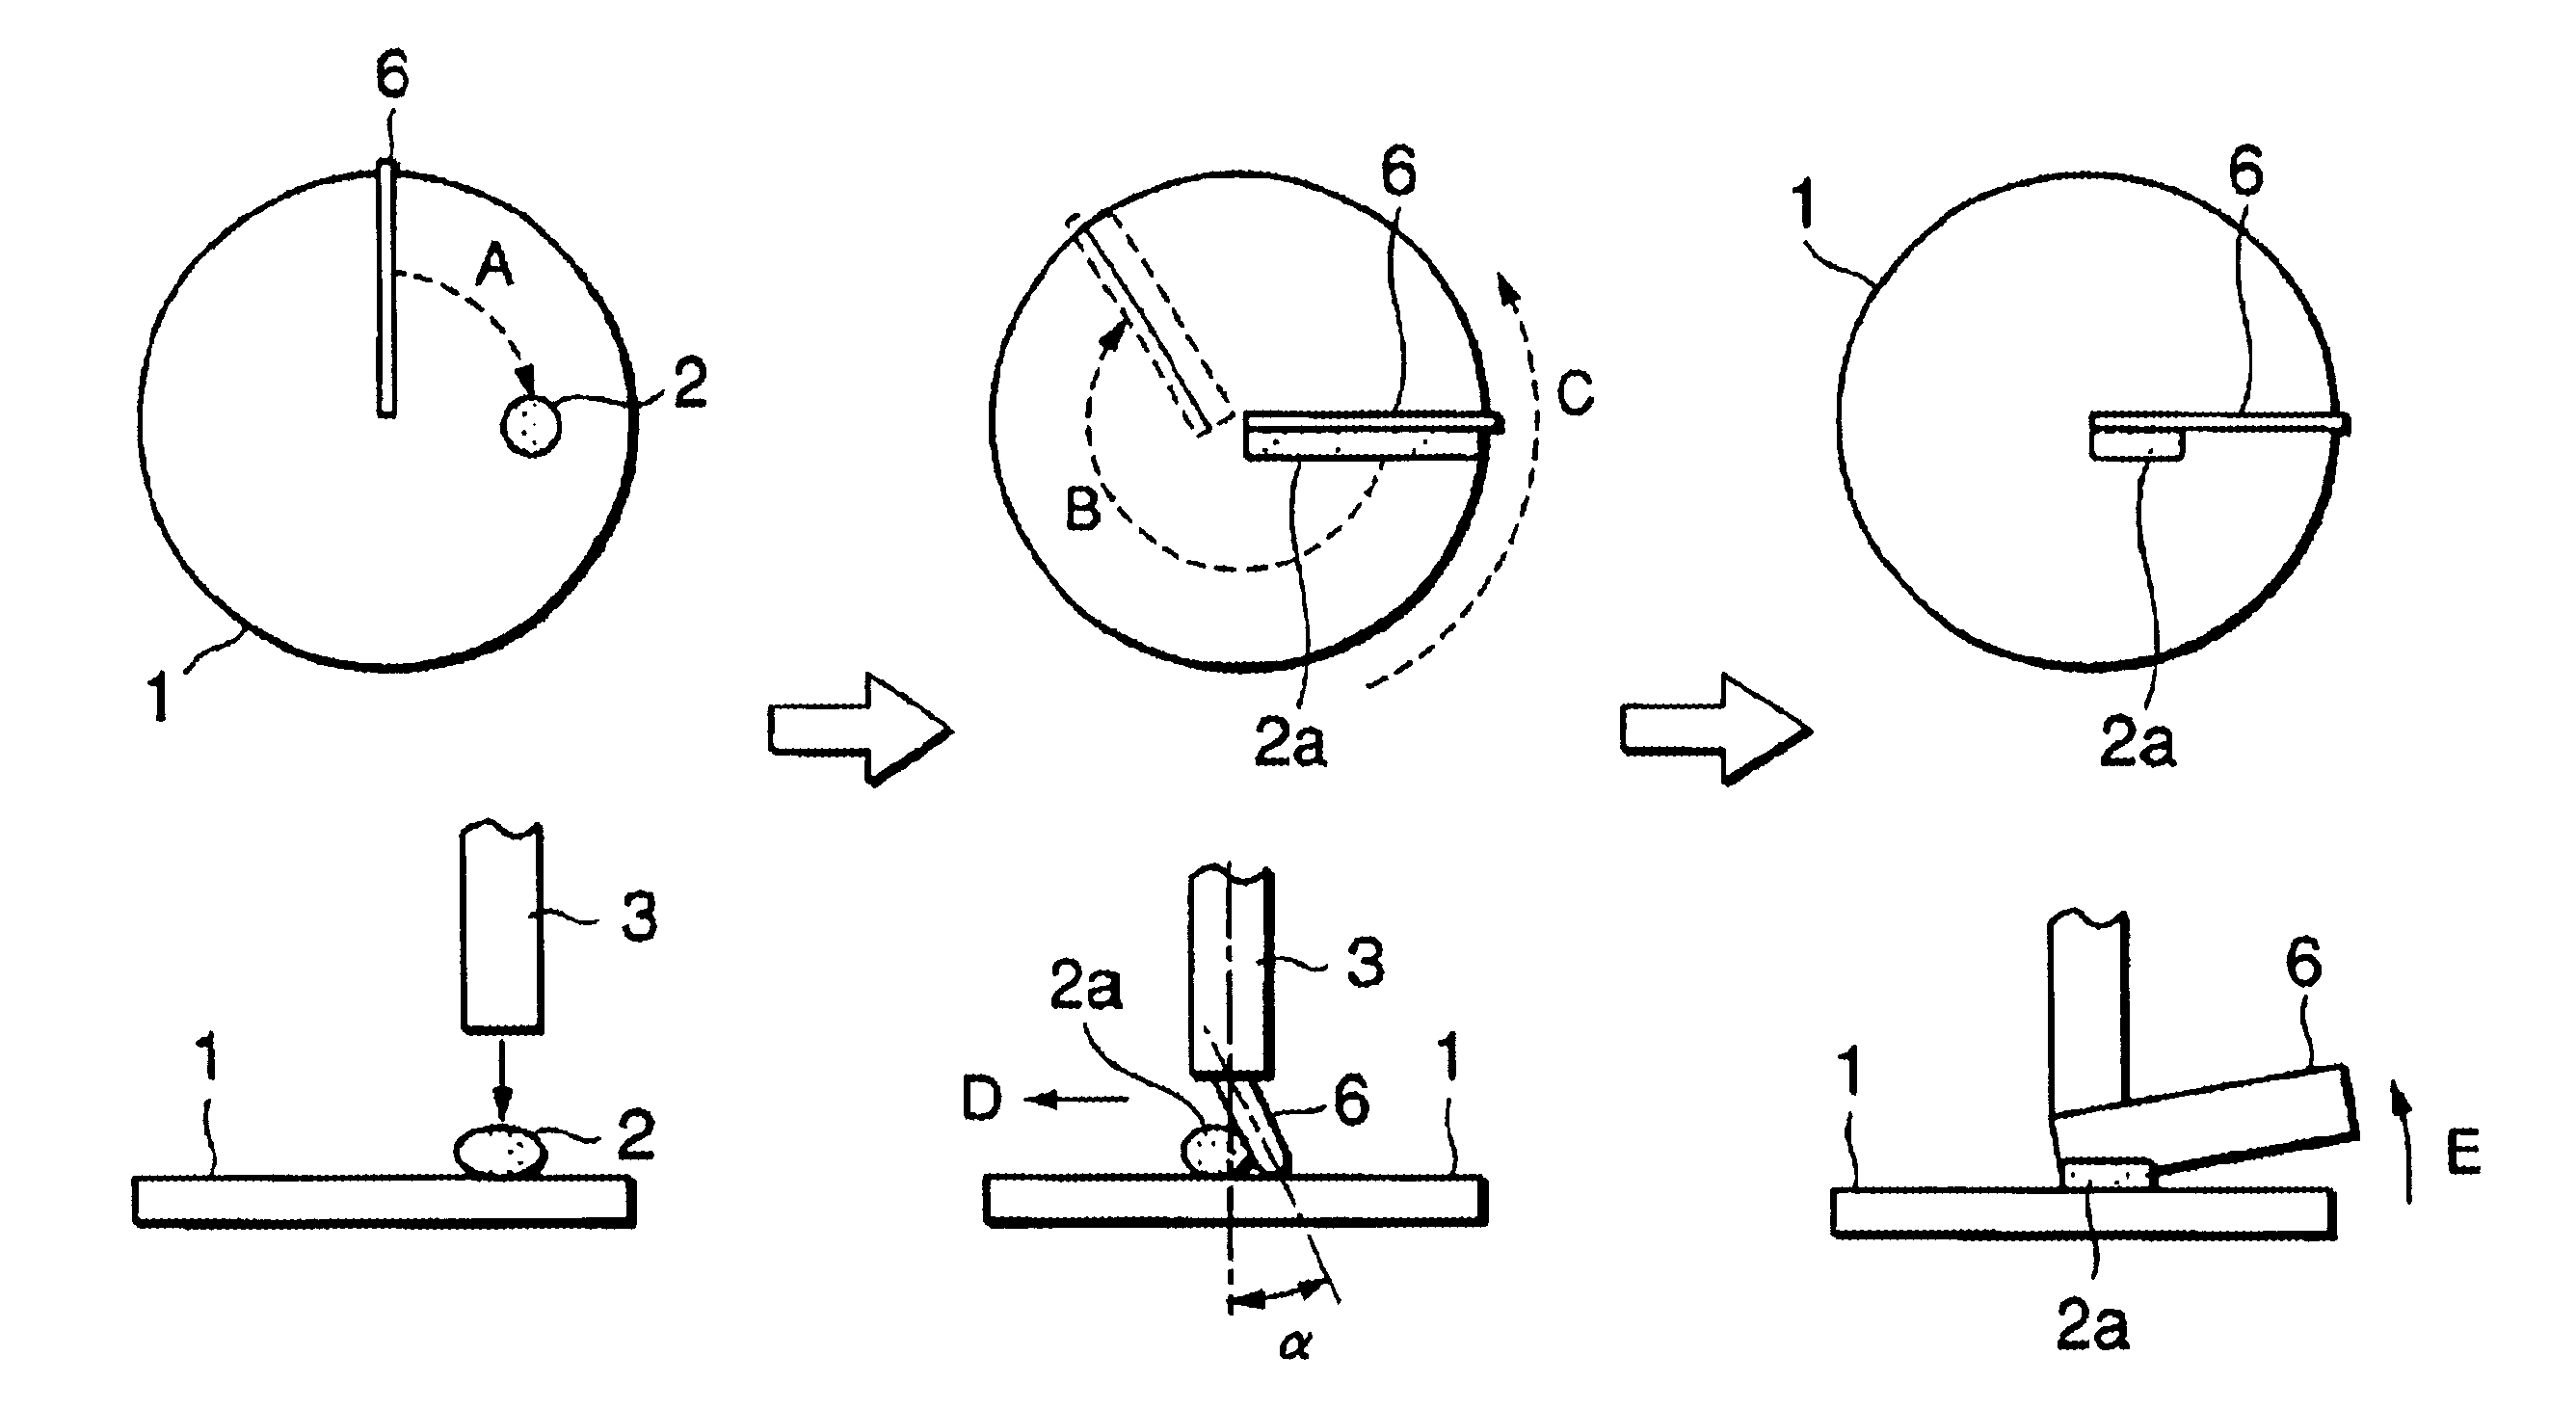 Method of collecting impurities on surface of semiconductor wafer